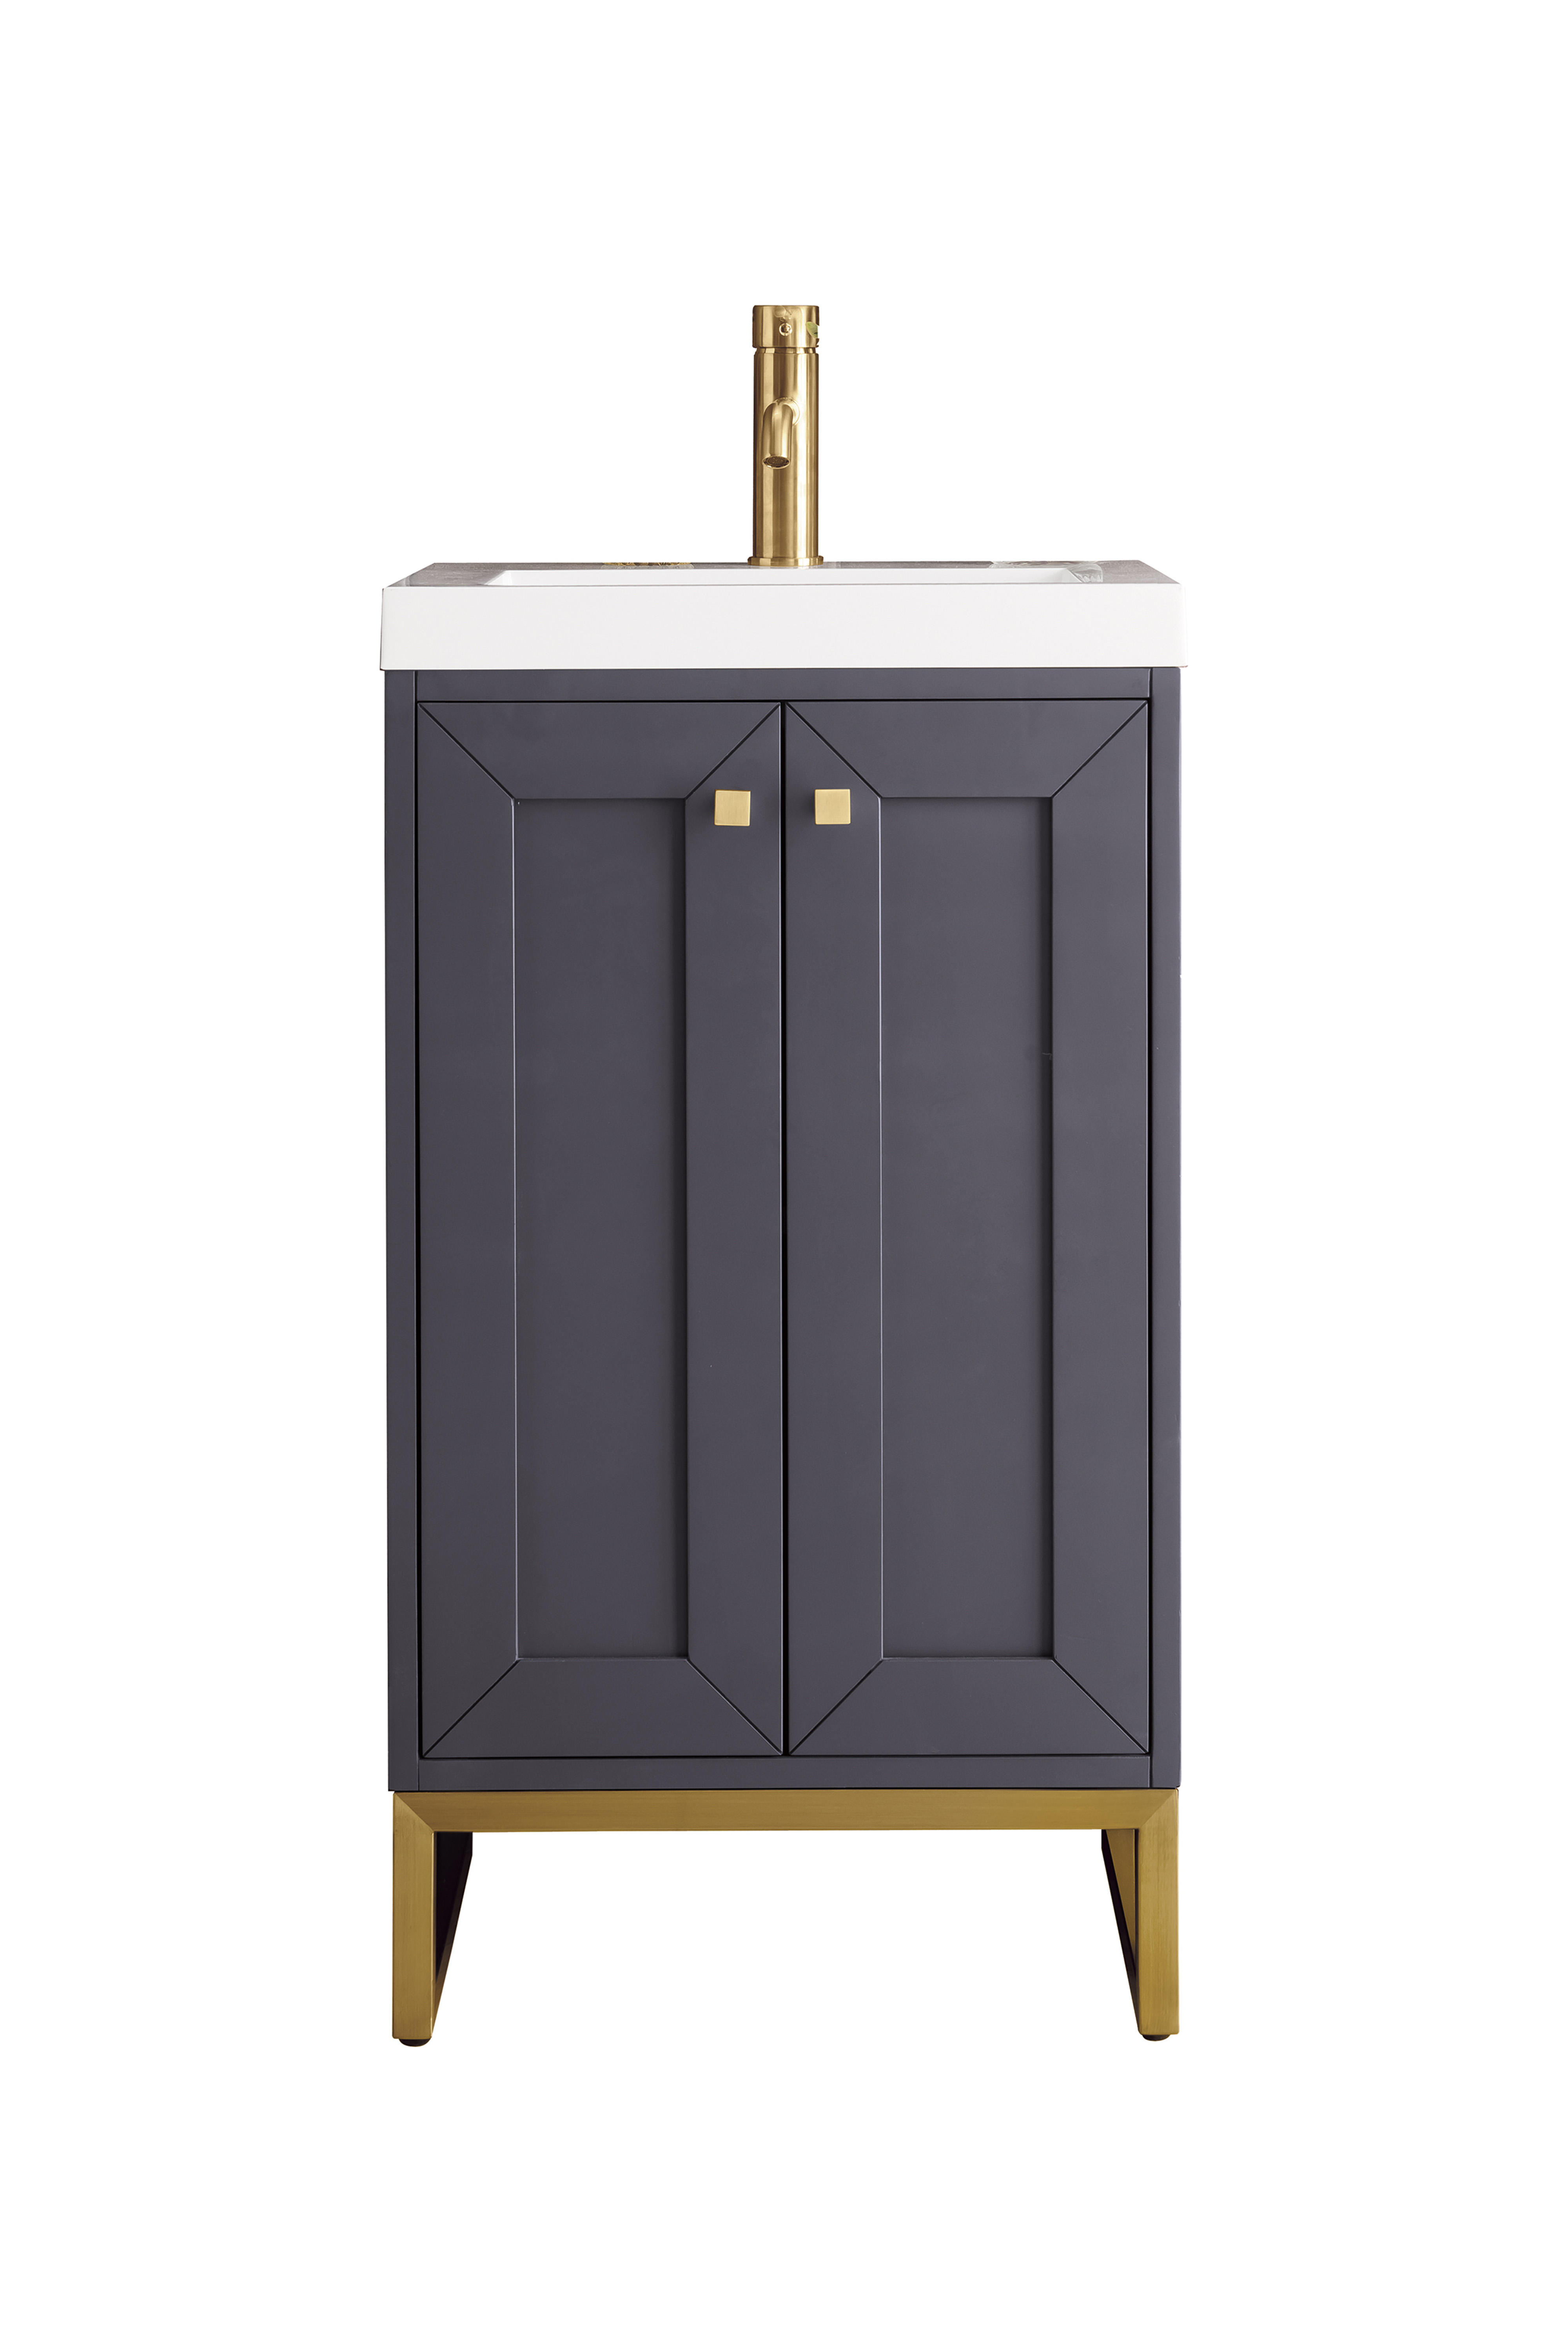 James Martin E303V20MGRGDWG Chianti 20" Single Vanity Cabinet, Mineral Grey, Radiant Gold, w/ White Glossy Composite Countertop